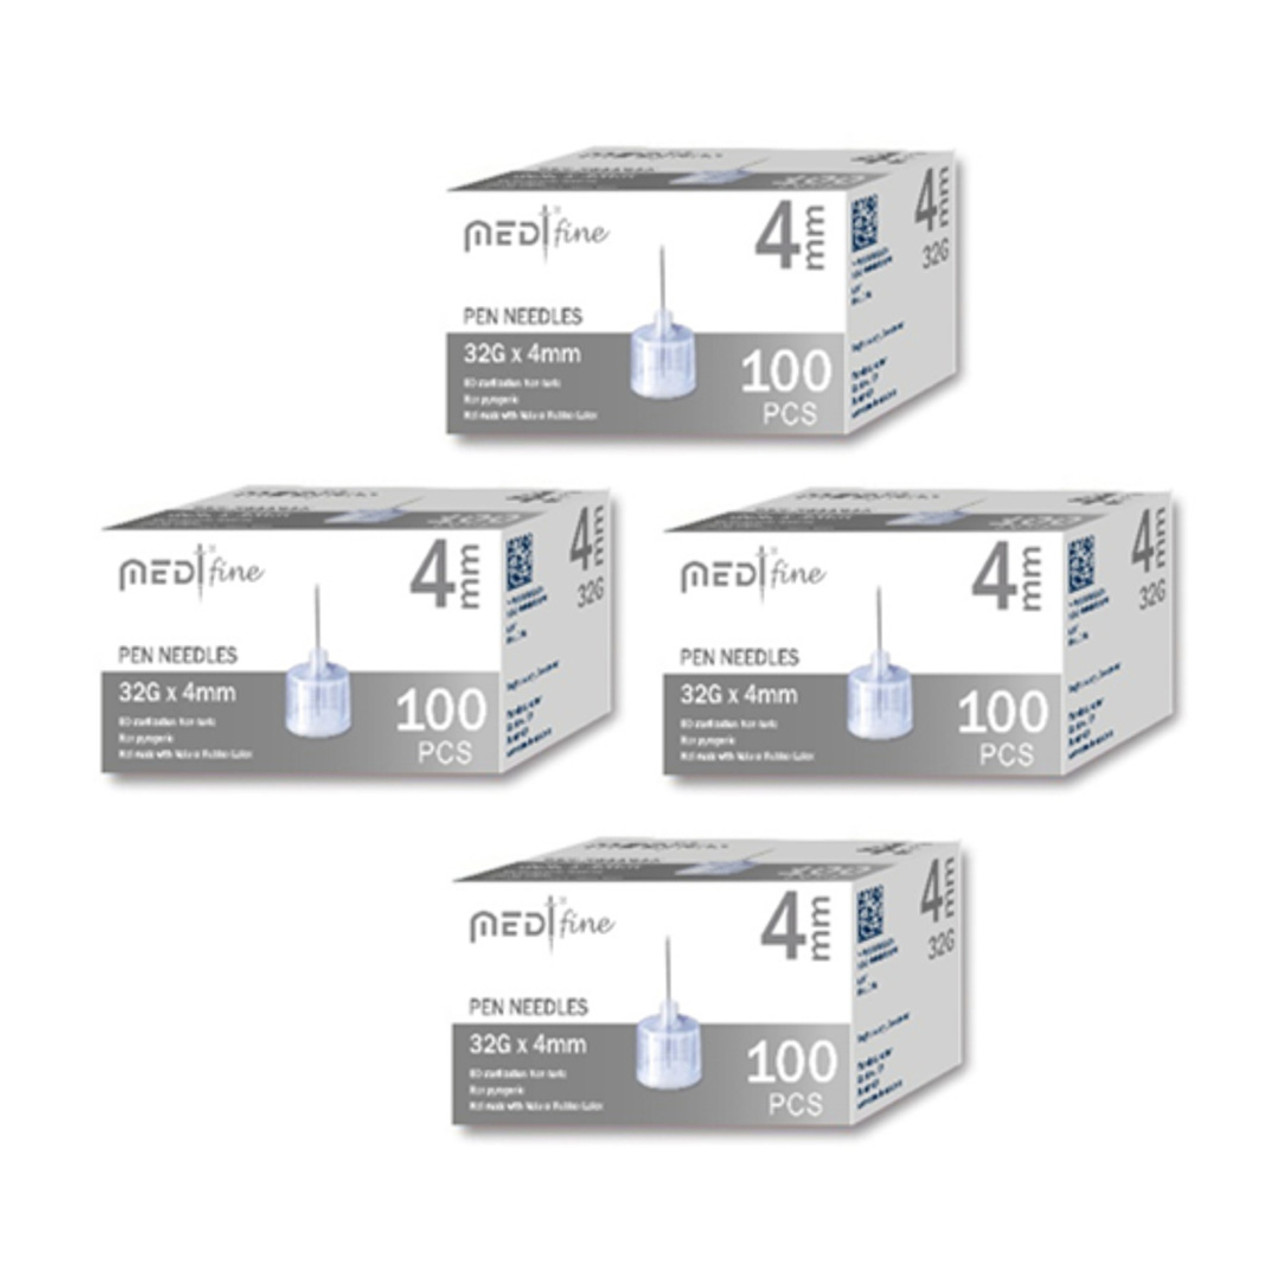  Medt - Fine Insulin Pen Needles (32G 4mm) - Diabetic Needles  for Insulin Injections, Ultra Fine Compatible with Most Diabetes Pens - 100  Ct, Pack of 2 : Health & Household